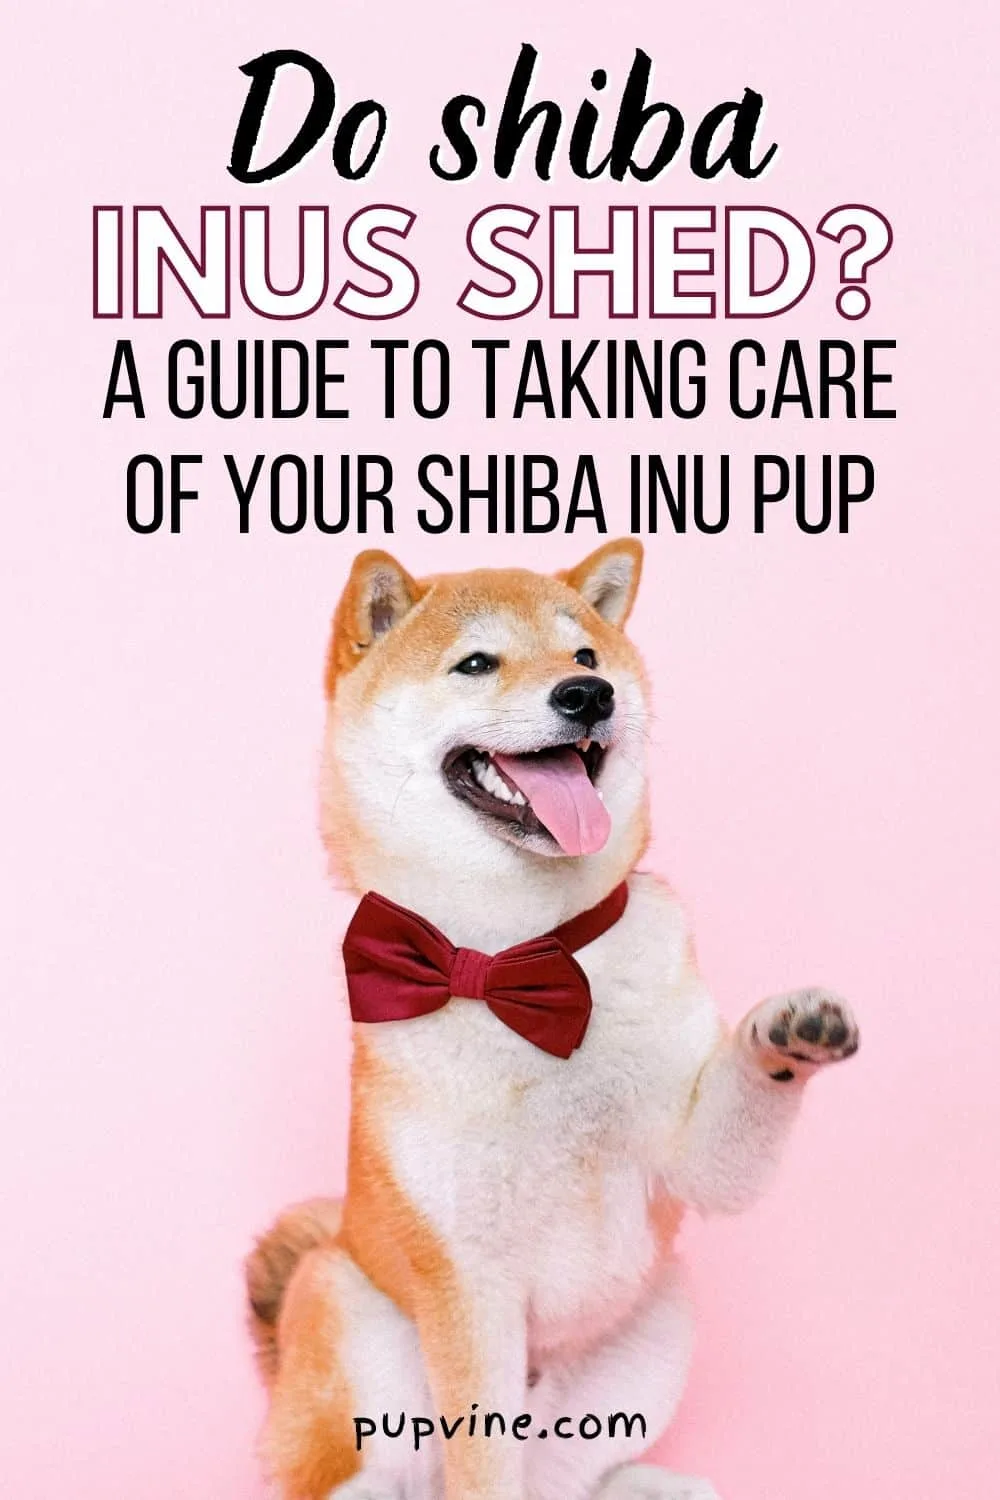 Do Shiba Inus Shed? A Guide to Taking Care of Your Shiba Inu Pup